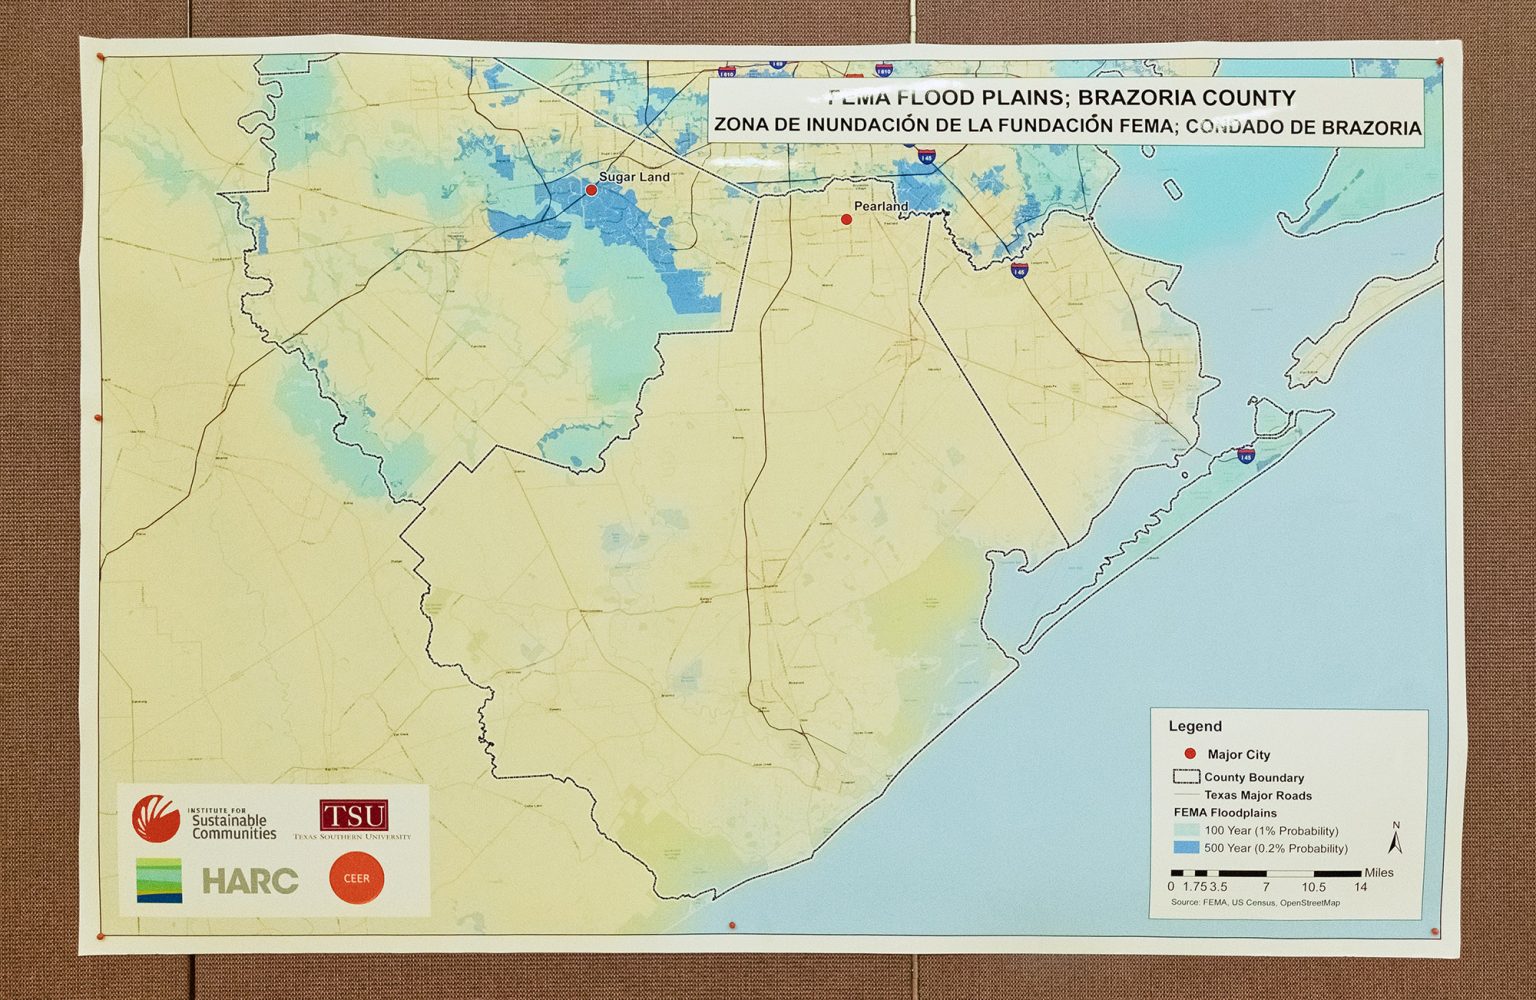 A map from Texas Southern University shows FEMA flood plains in Brazoria County, Texas and hangs on display during CEER’s People’s Hearing event April 30, 2022 in Houston, Texas.